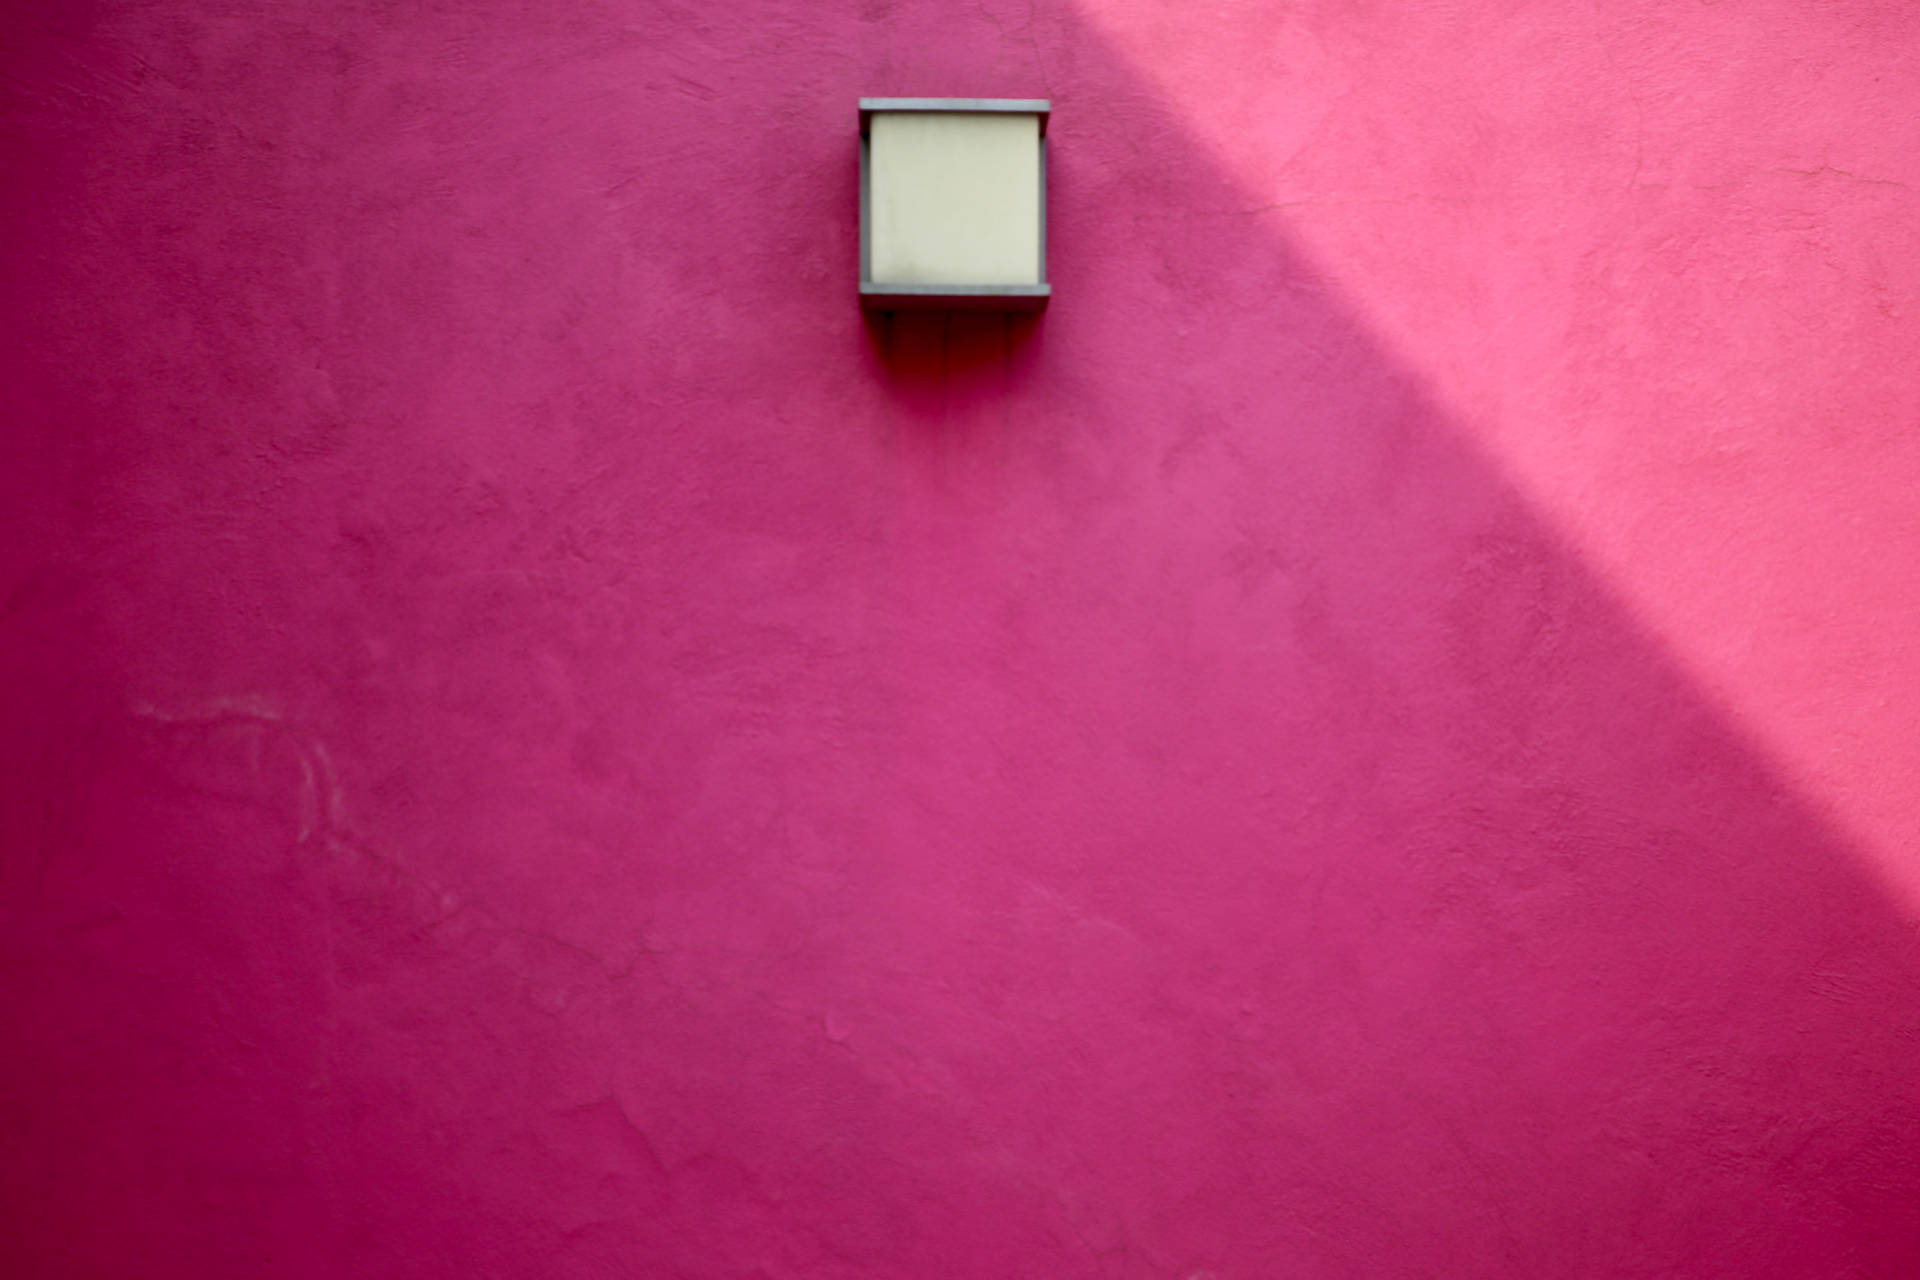 Bright Pink Wall With White Box Wallpaper